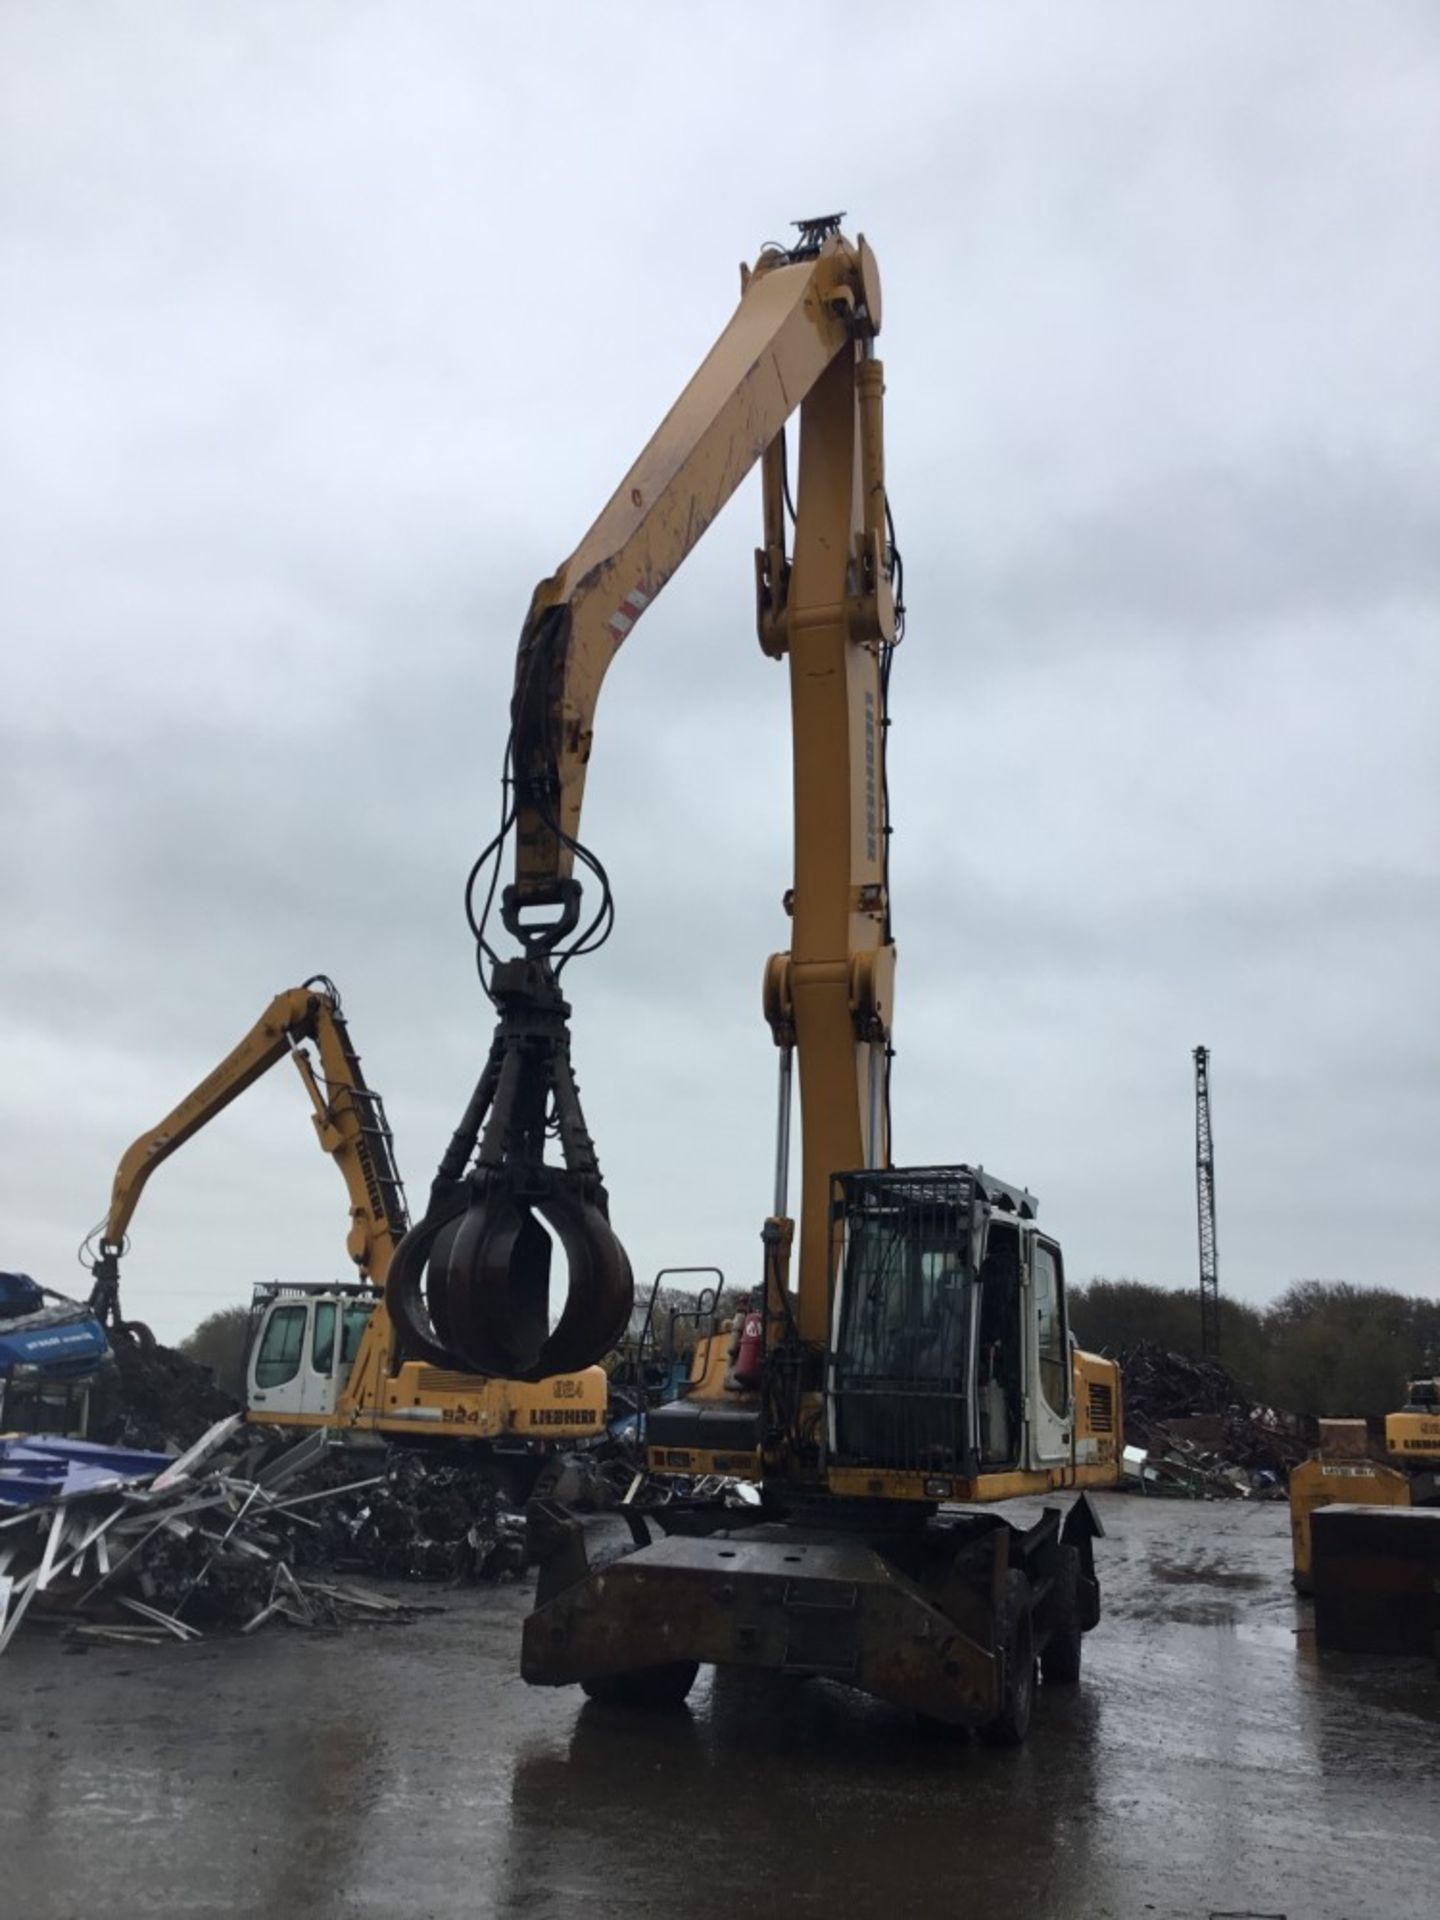 2010 LIEBHERR 934 (LOCATION ANNAN) 15340 HOURS (RING FOR COLLECTION DETAILS) [+ VAT] - Image 3 of 4